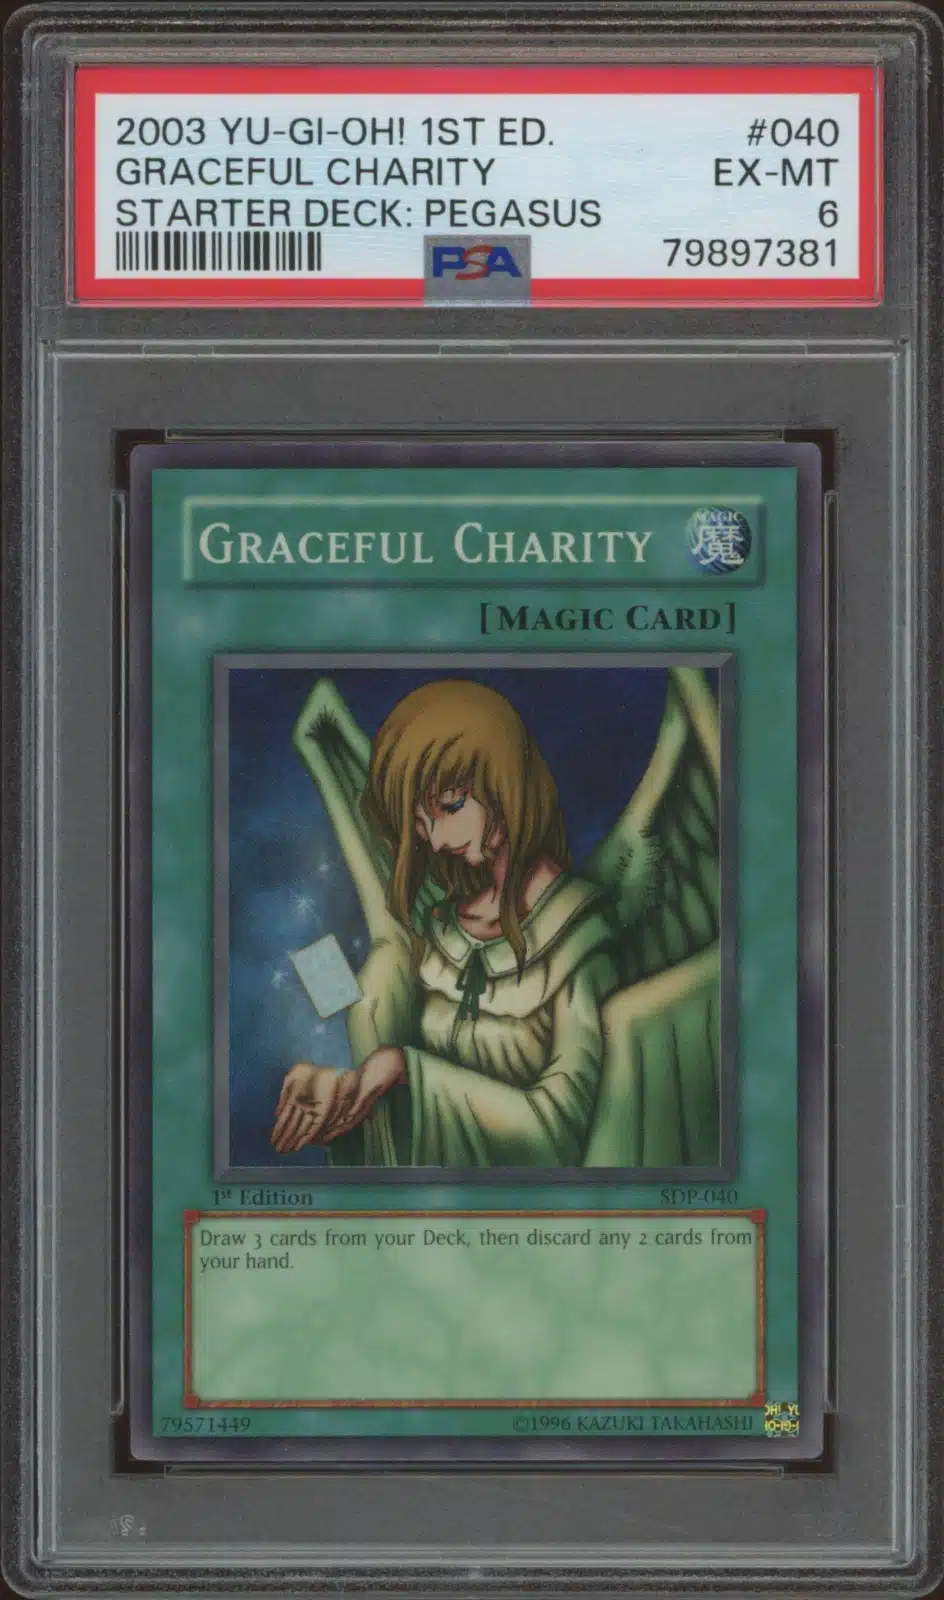 2003 Yu-Gi-Oh! Starter Deck: Pegasus (1st Edition) Graceful Charity #SDP-040 (PSA 6) (Front)